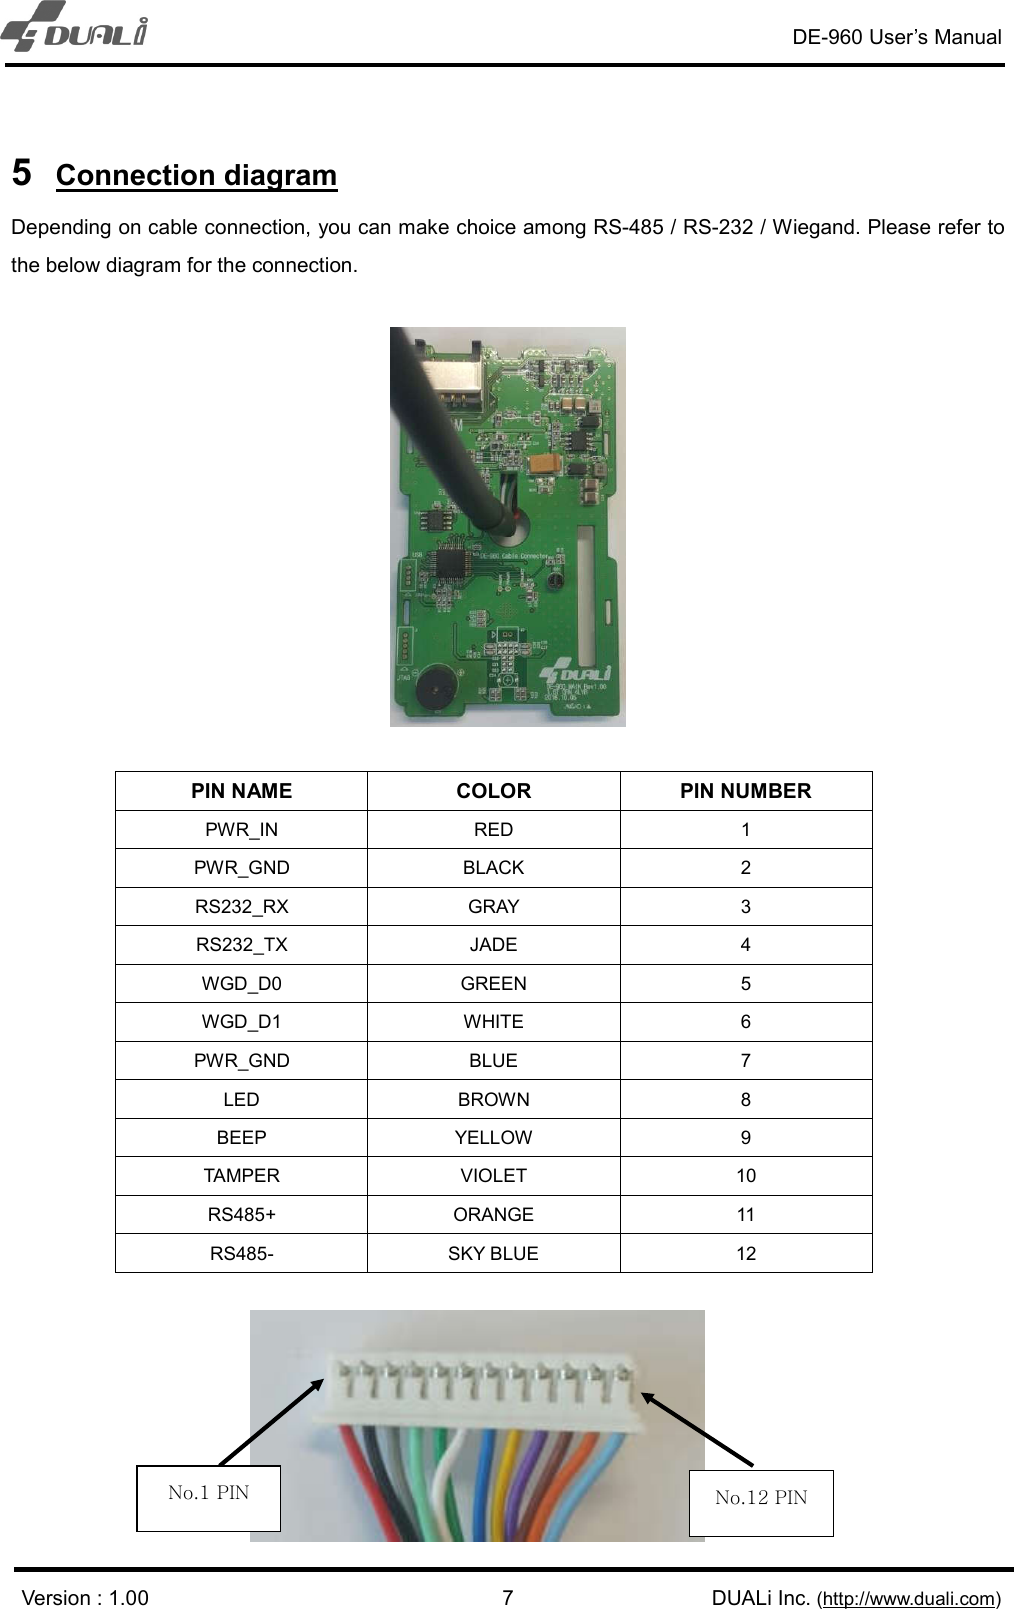 DE-960 User’s Manual   Version : 1.00                                             DUALi Inc. (http://www.duali.com) 7 5  Connection diagram Depending on cable connection, you can make choice among RS-485 / RS-232 / Wiegand. Please refer to the below diagram for the connection.      PIN NAME  COLOR  PIN NUMBER PWR_IN  RED  1 PWR_GND  BLACK  2 RS232_RX  GRAY  3 RS232_TX  JADE  4 WGD_D0  GREEN  5 WGD_D1  WHITE  6 PWR_GND  BLUE  7 LED  BROWN  8 BEEP  YELLOW  9 TAMPER  VIOLET  10 RS485+  ORANGE  11 RS485-  SKY BLUE  12       No.1 PIN  No.12 PIN 